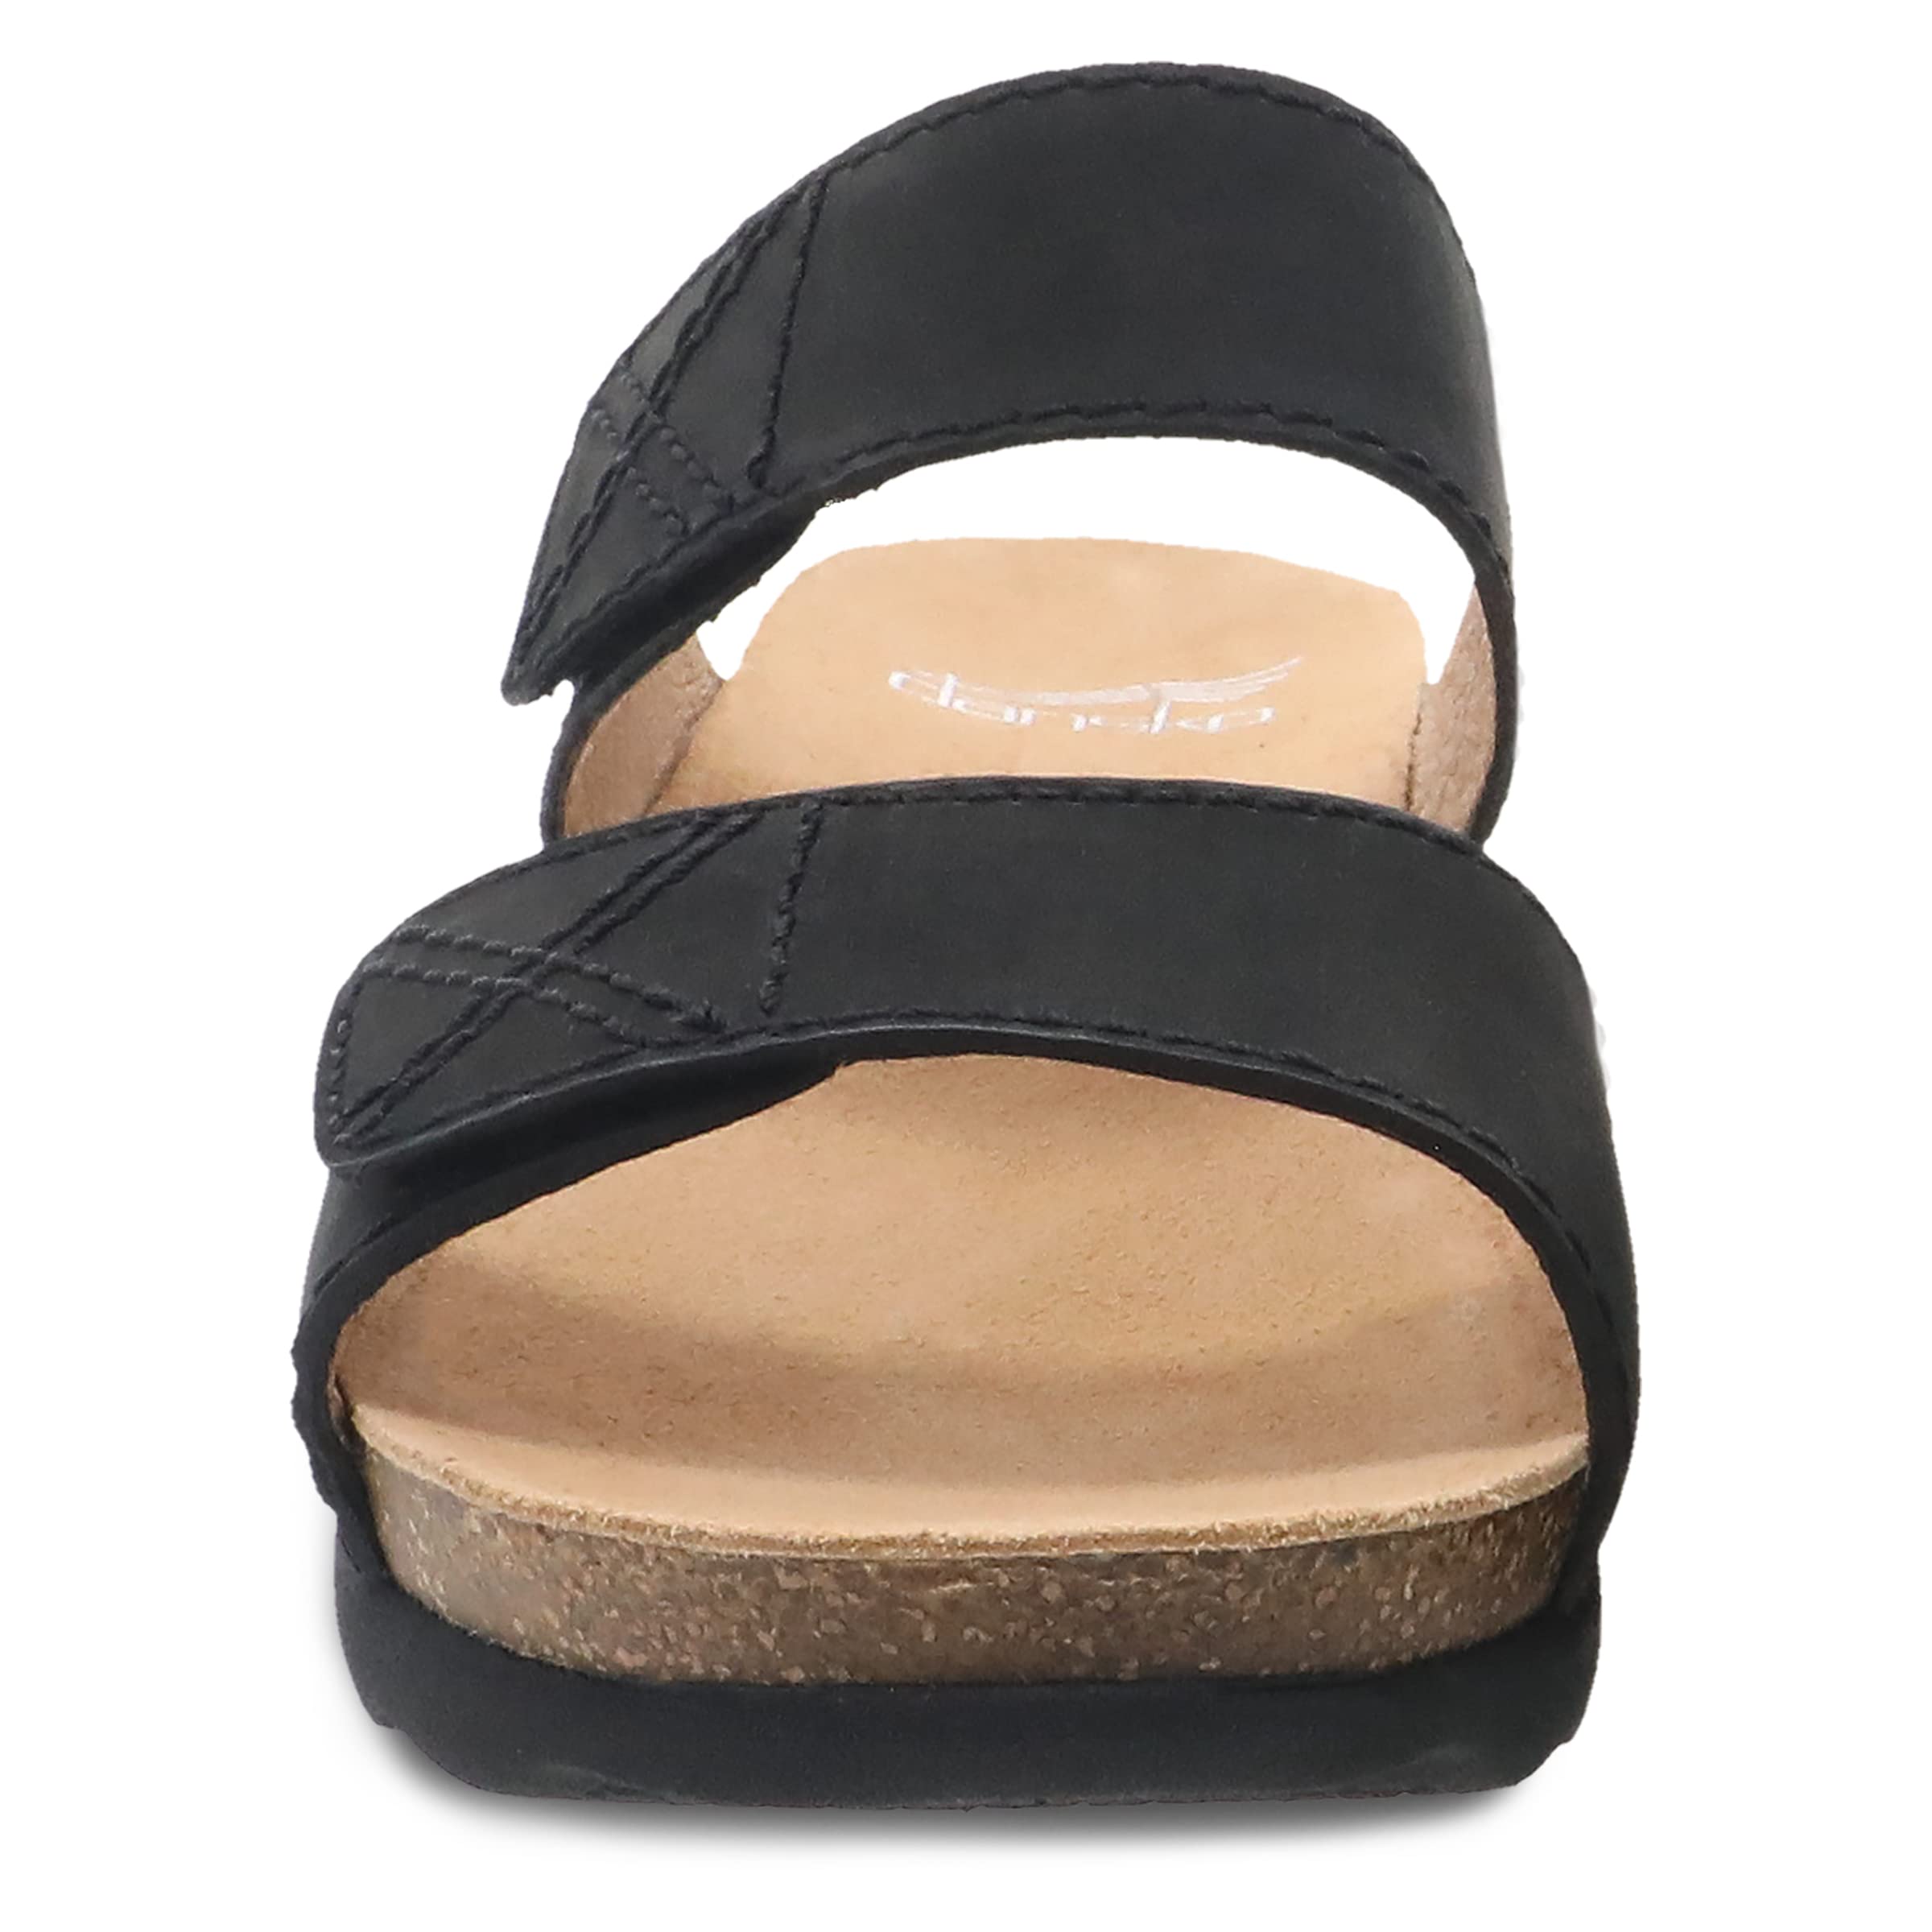 Dansko Maddy Slip-On Wedge Sandal for Women –Comfortable Wedge Shoes with Arch Support –Fully Adjustable Straps with Hook & Loop Closure–Versatile Casual to Dressy Footwear –Lightweight Rubber Outsole